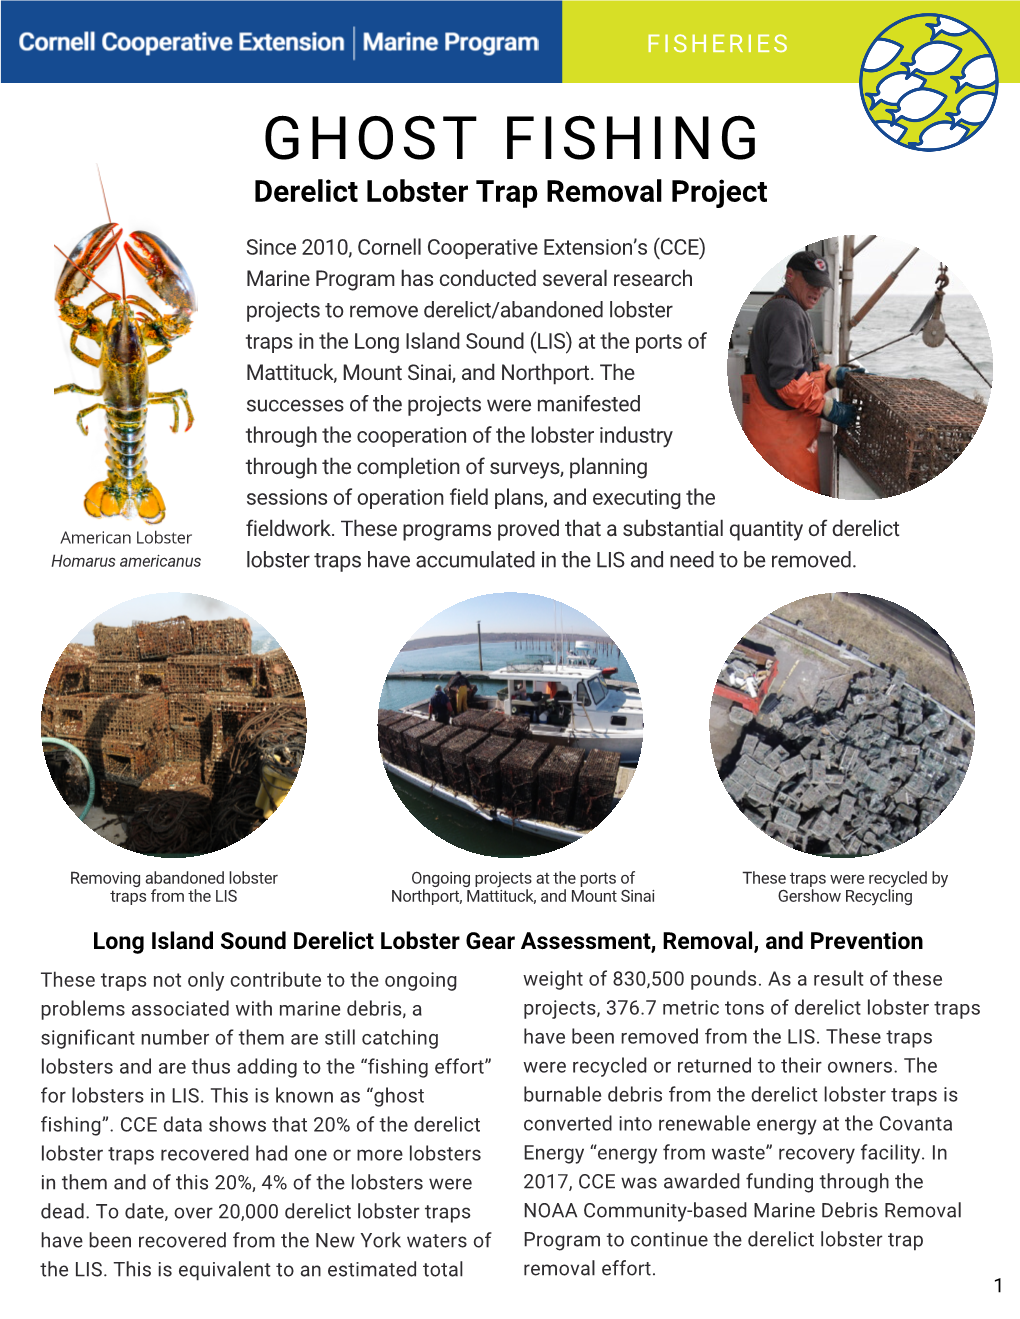 Derelict Lobster Trap Removal Project